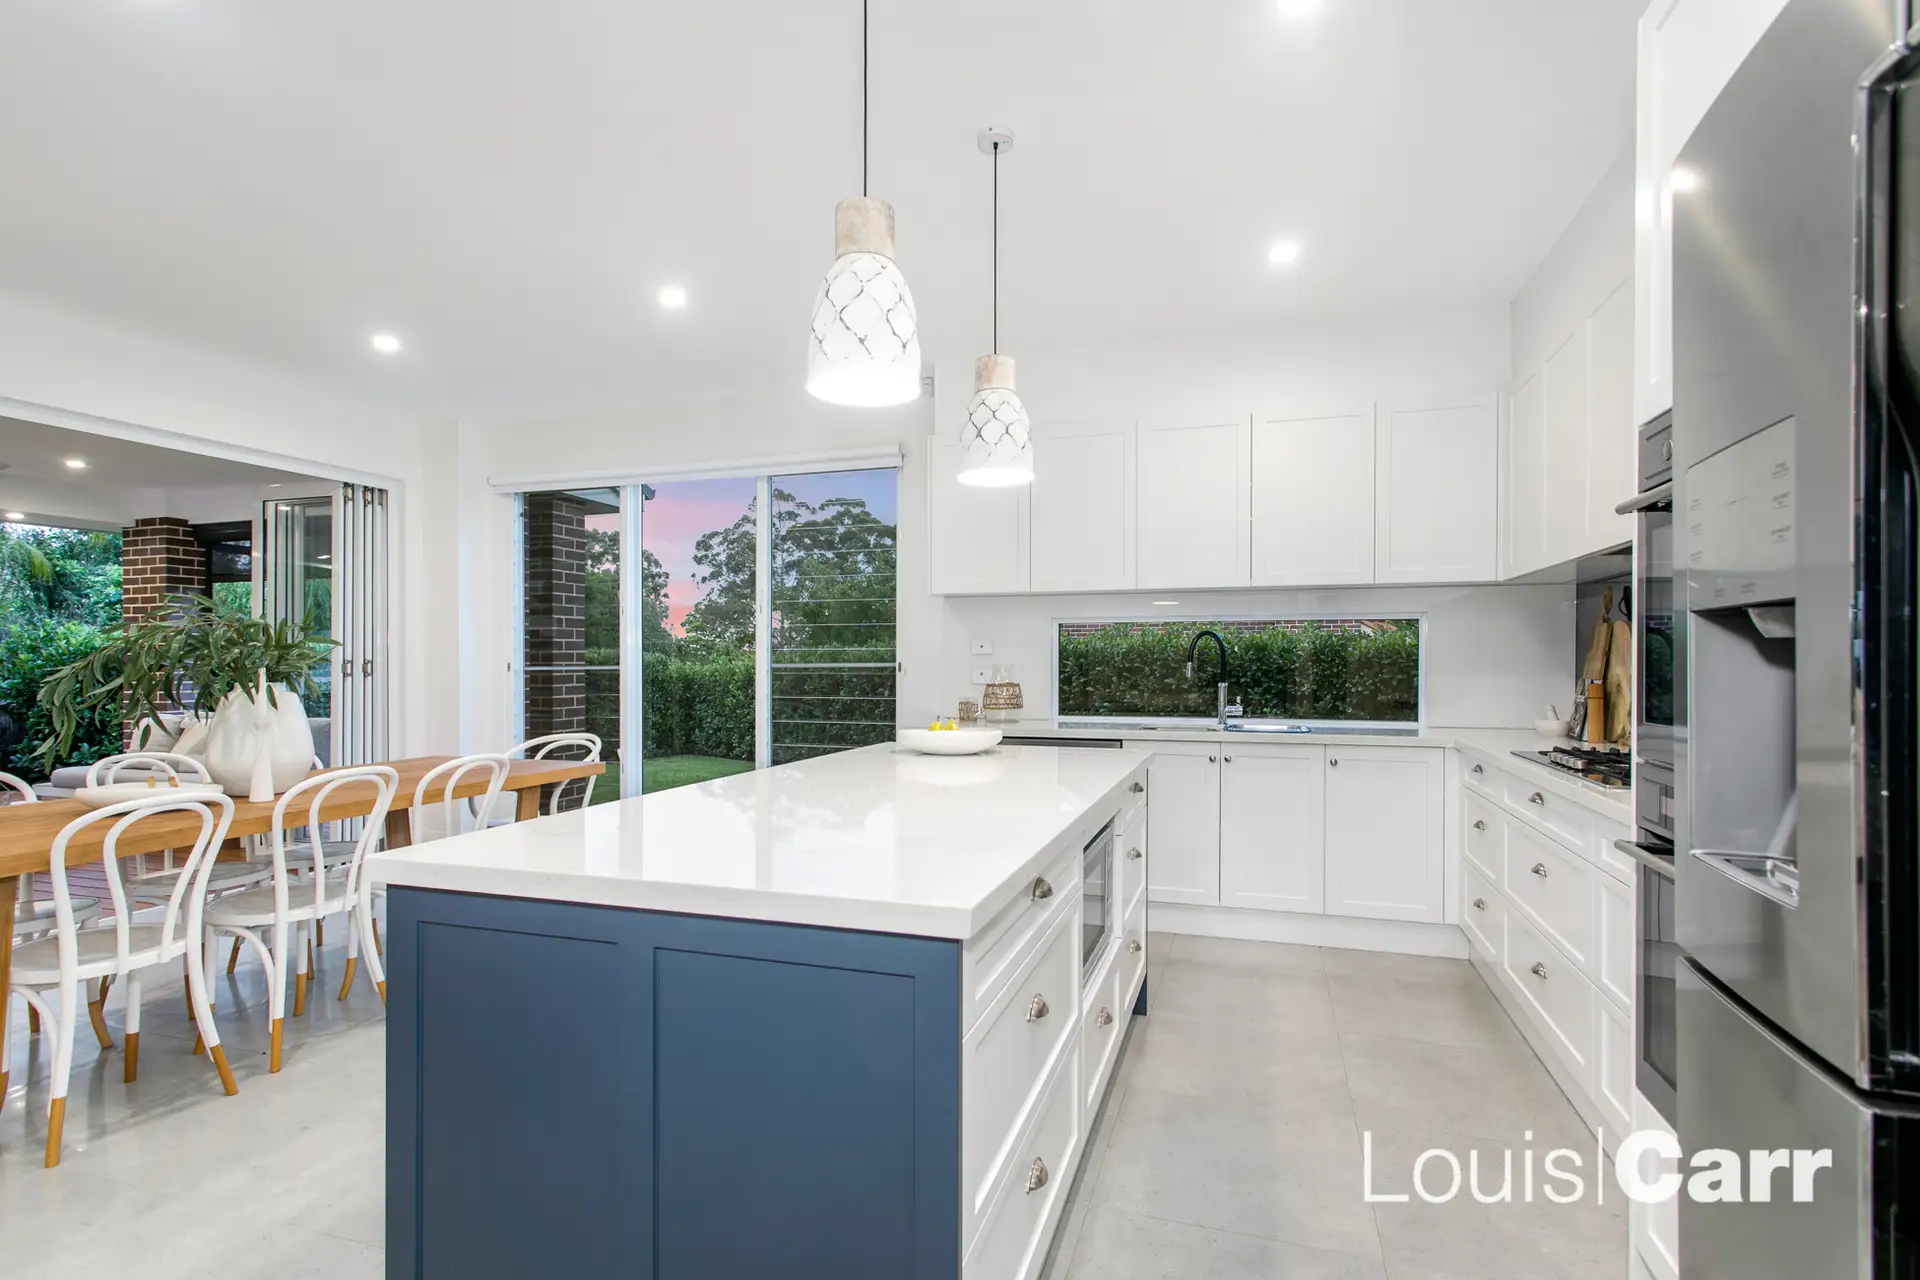 Photo #5: 2a Salisbury Downs Drive, West Pennant Hills - Sold by Louis Carr Real Estate